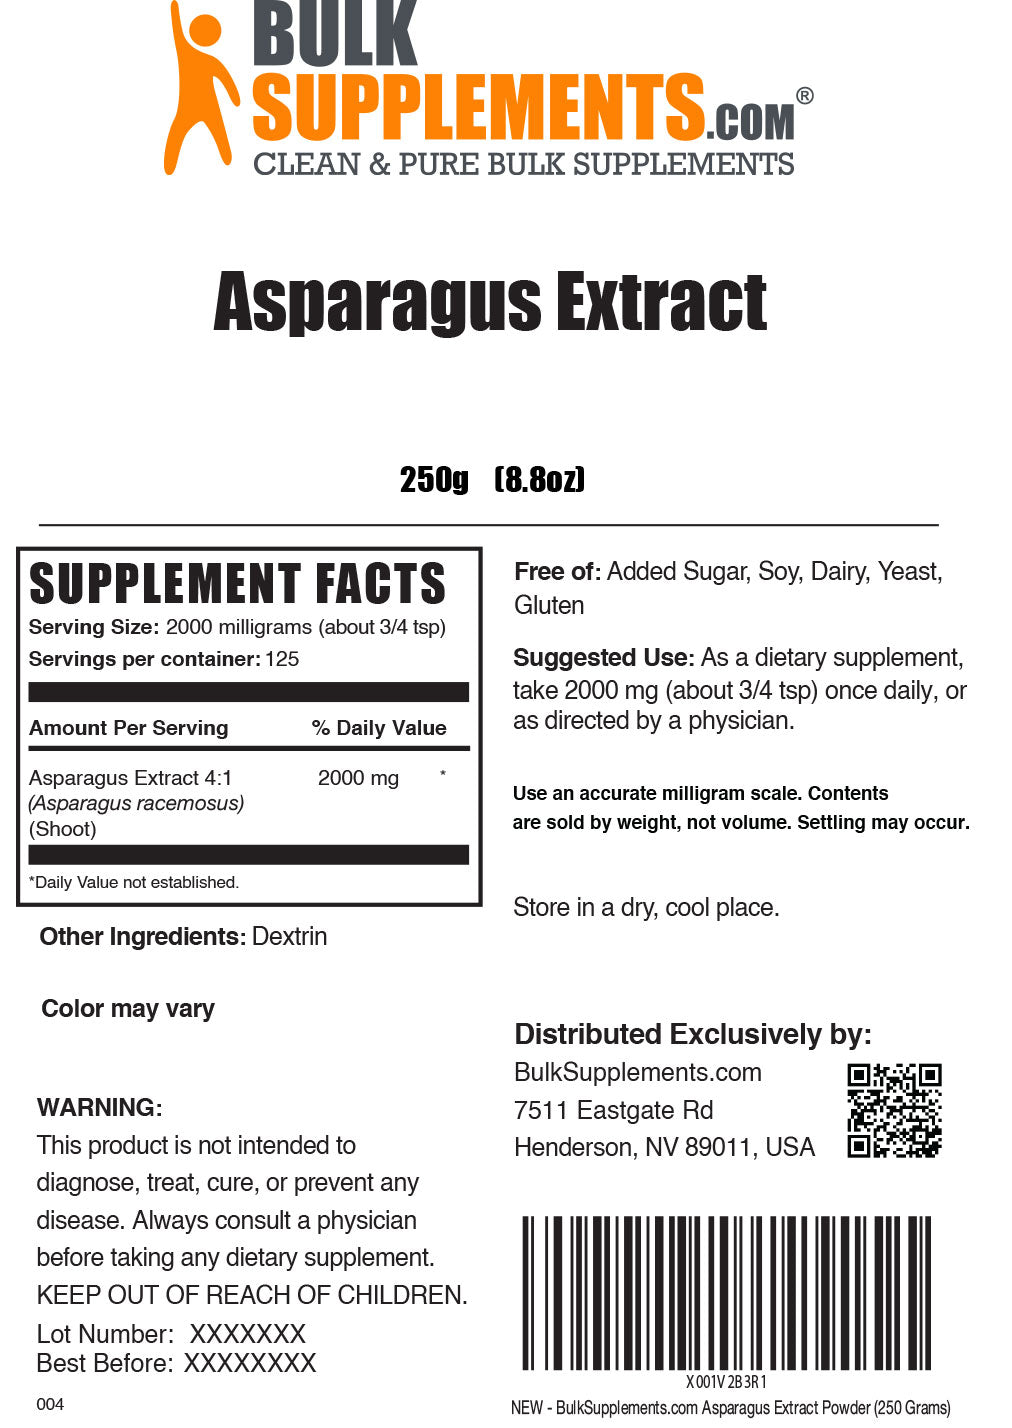 Asparagus Extract powder label 250g